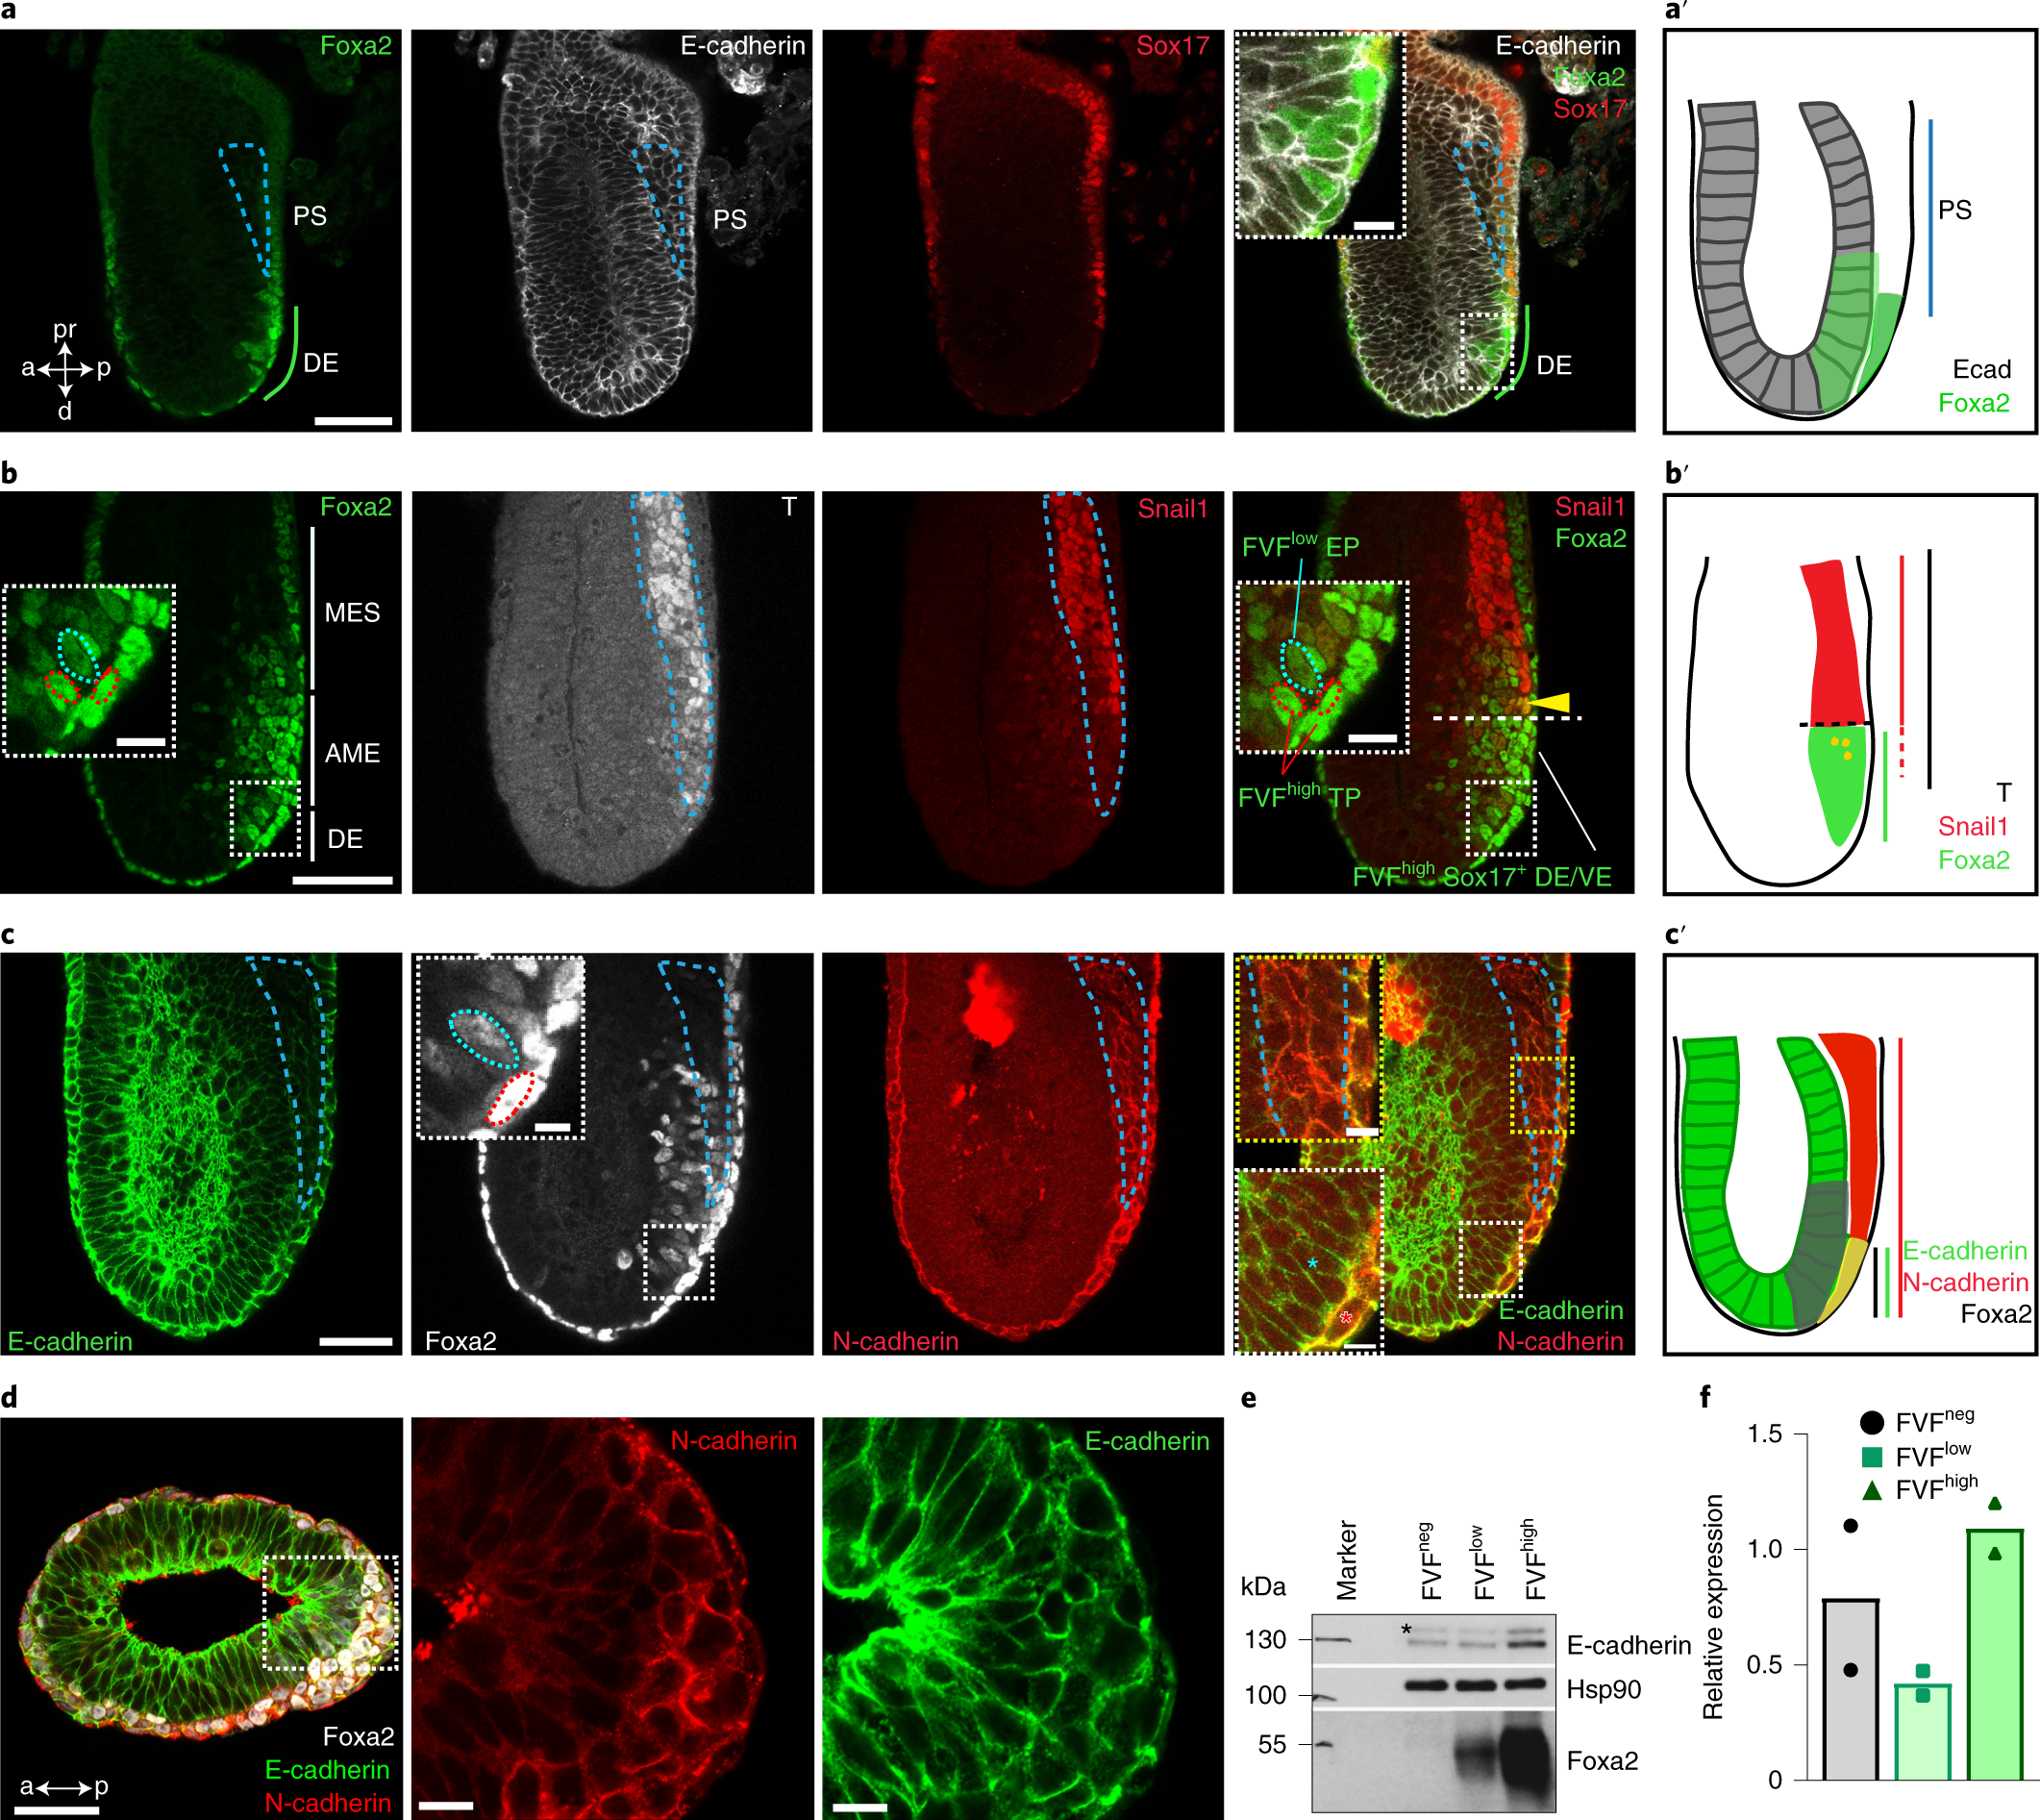 Epithelial cell plasticity drives endoderm formation during gastrulation